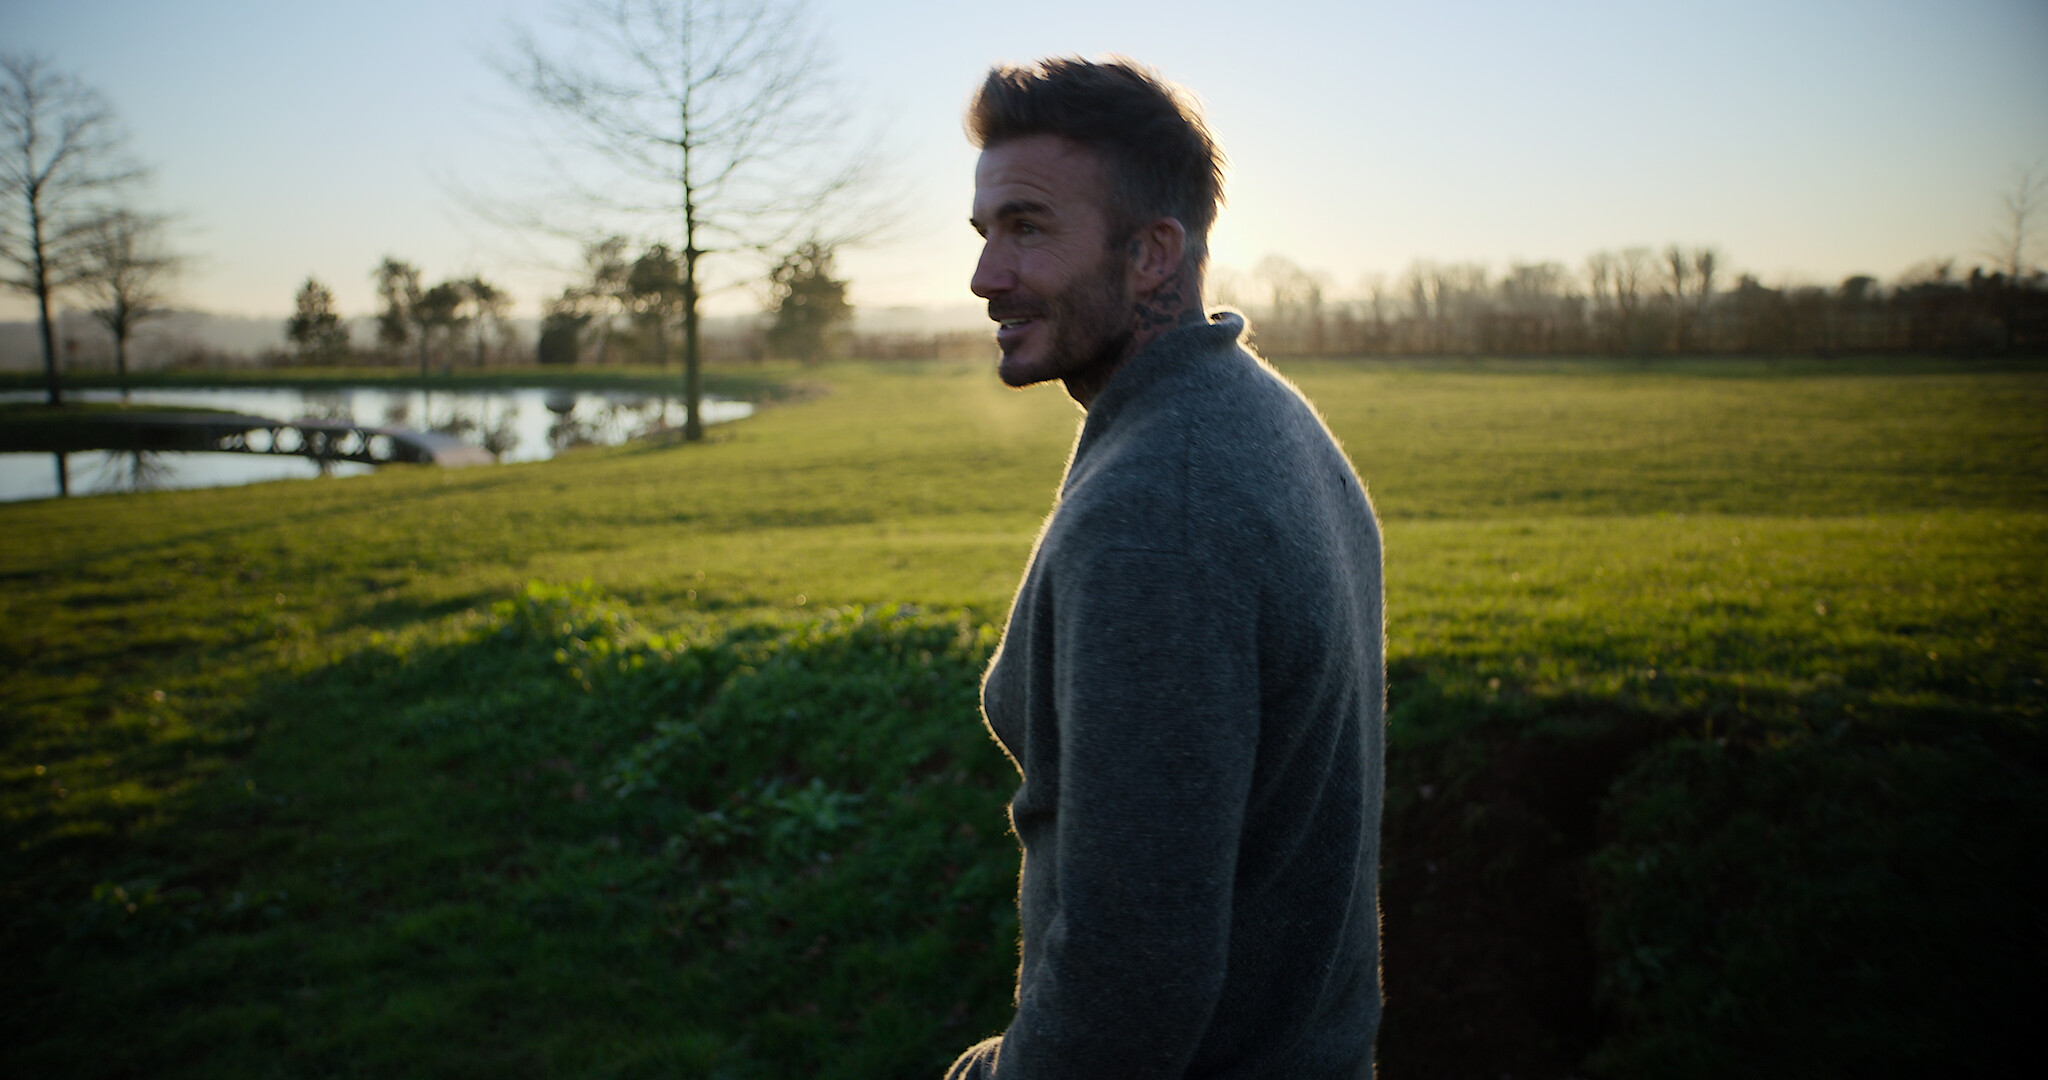 Get David Beckham's Style In Five Easy Steps